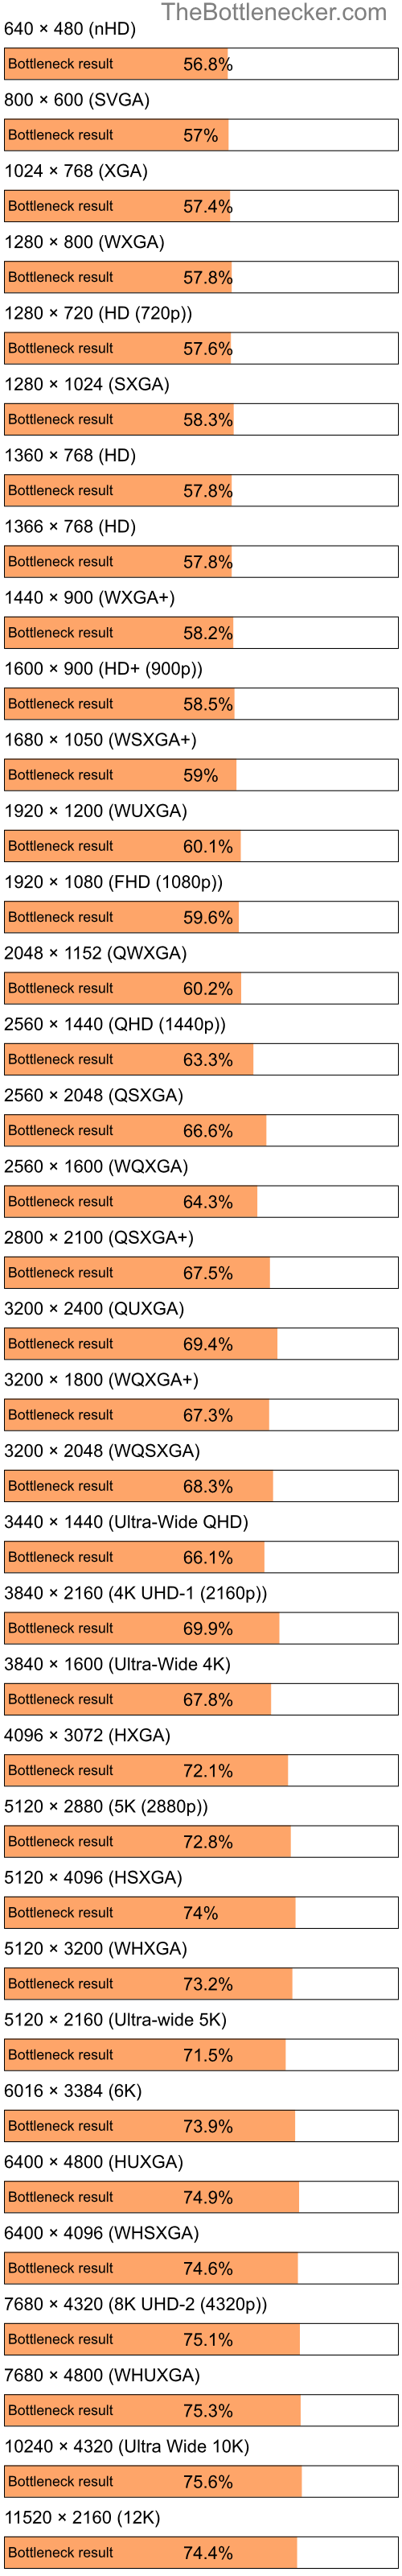 Bottleneck results by resolution for Intel Pentium 4 and AMD Mobility Radeon X1600 in Processor Intense Tasks